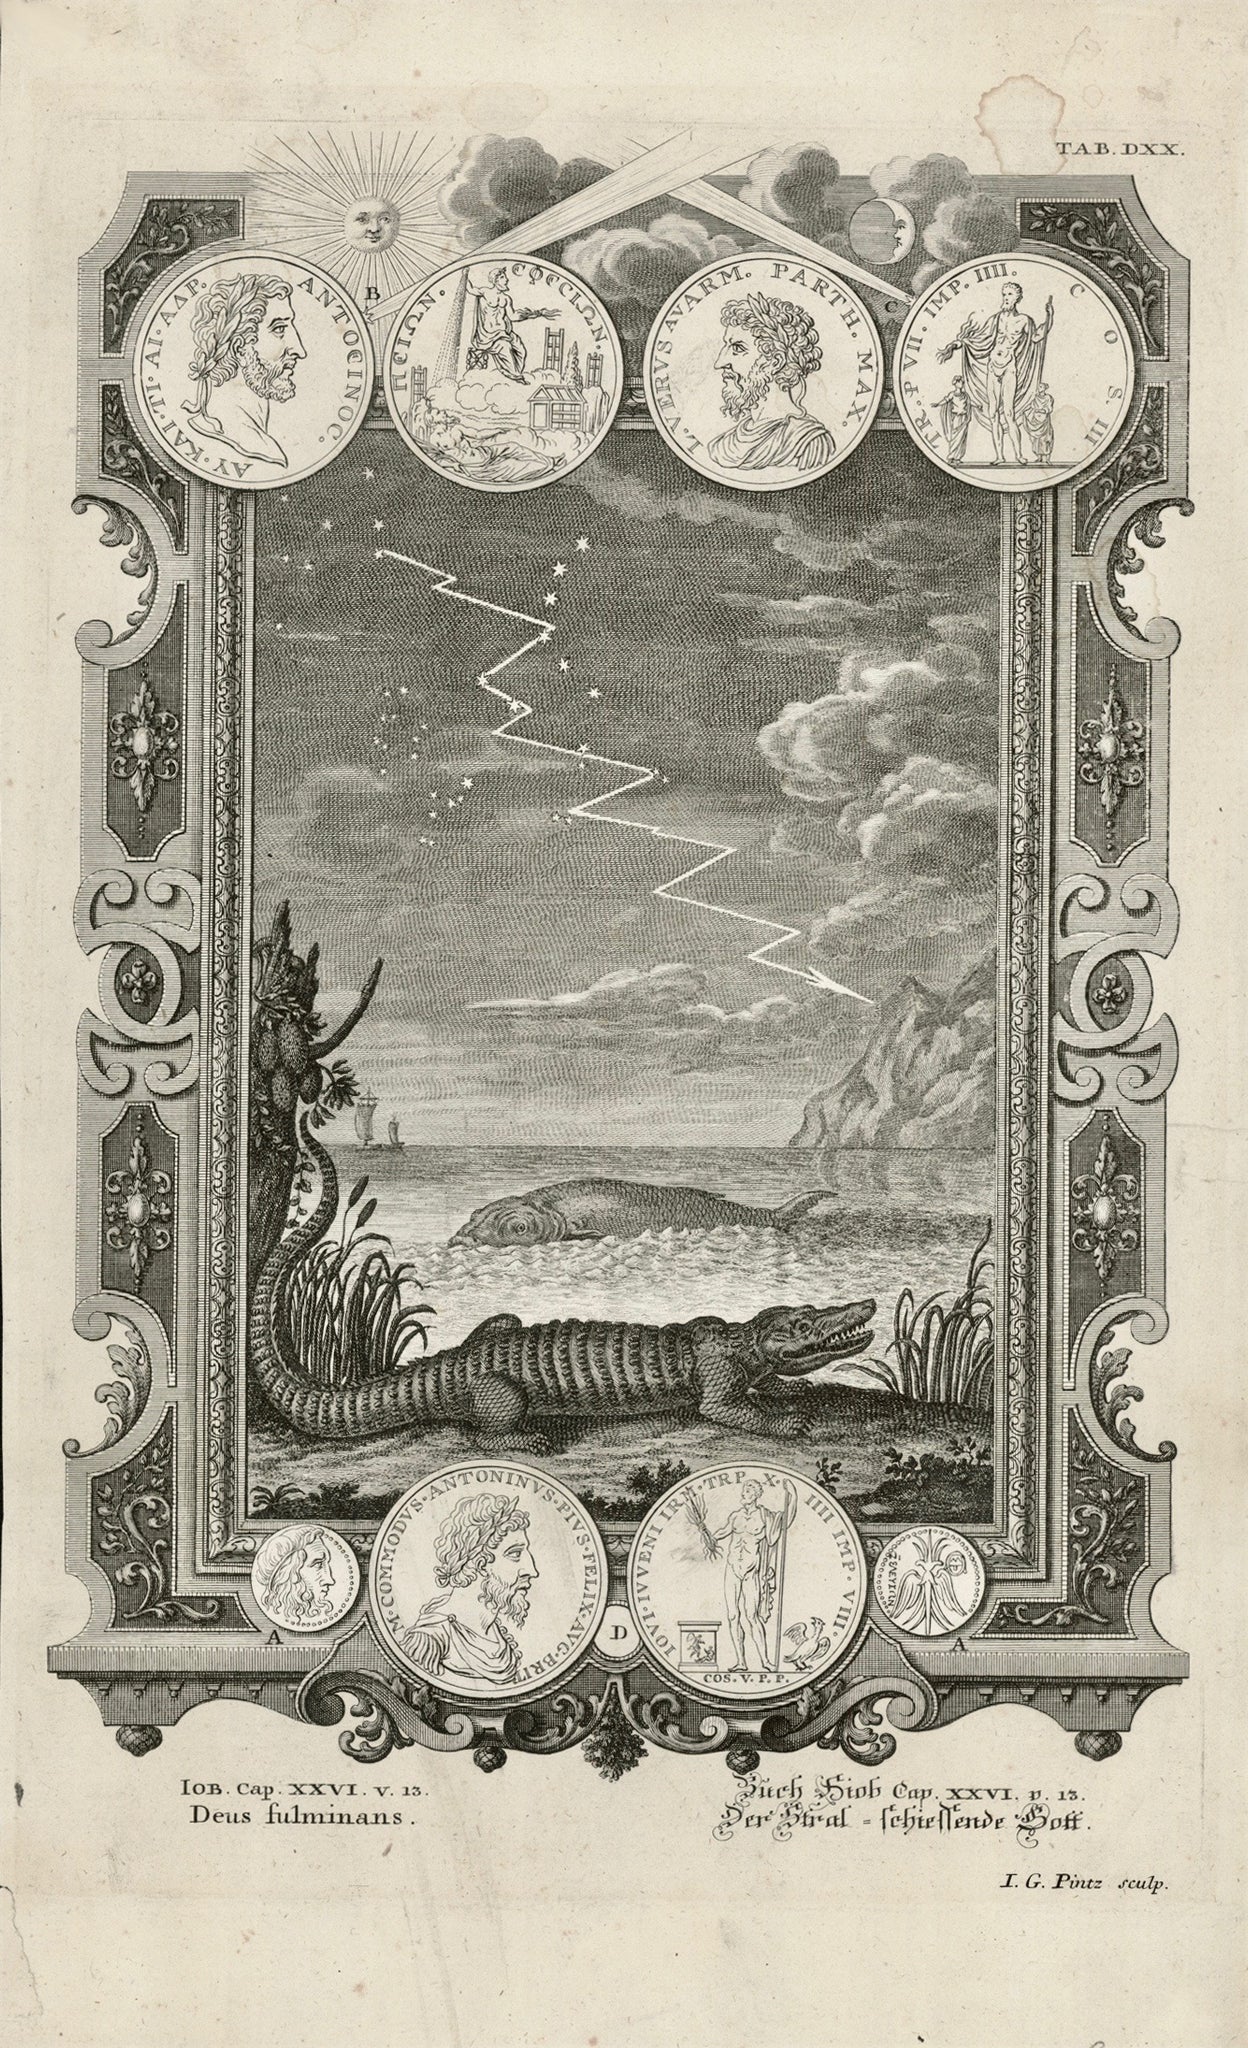 "Buch Hiob Cap. XXVI v. 13" . The fulminant God. Crocodile and whale as well as coins and medals.  Copperplate etching. Published in "Physica sacra" (Bible) by Johann Jakob Scheuchzer. Augsburg, 1731-35